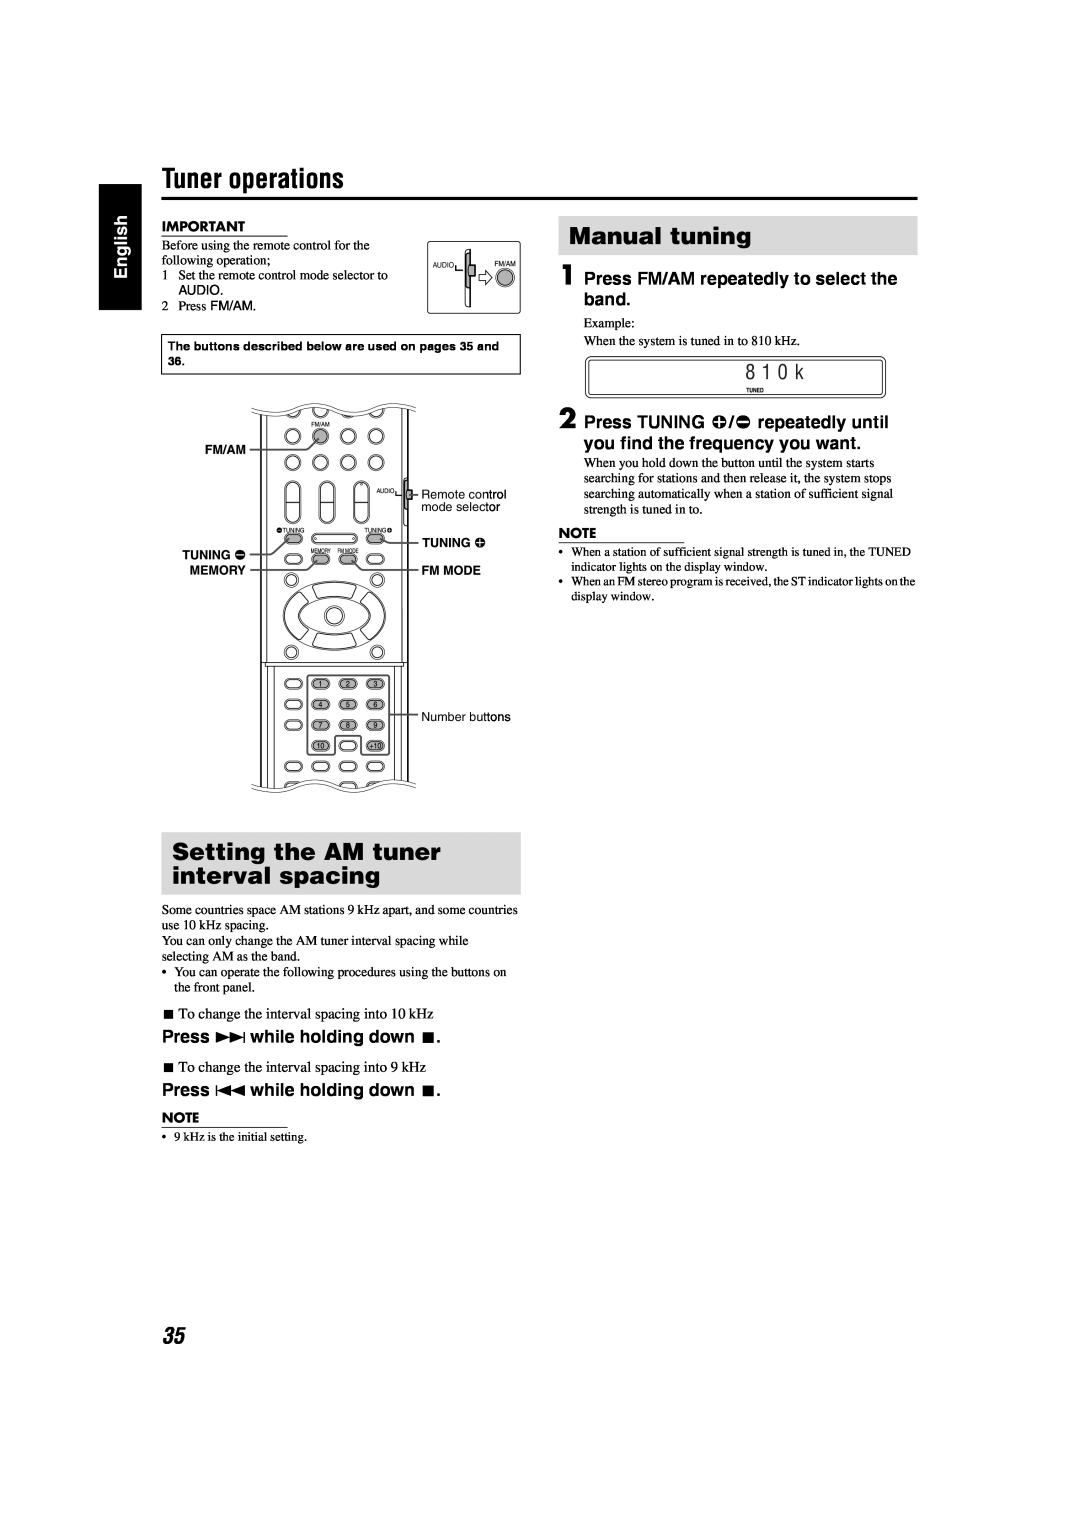 JVC GVT0141-003A manual Tuner operations, Manual tuning, Setting the AM tuner interval spacing, 8 1 0 k 